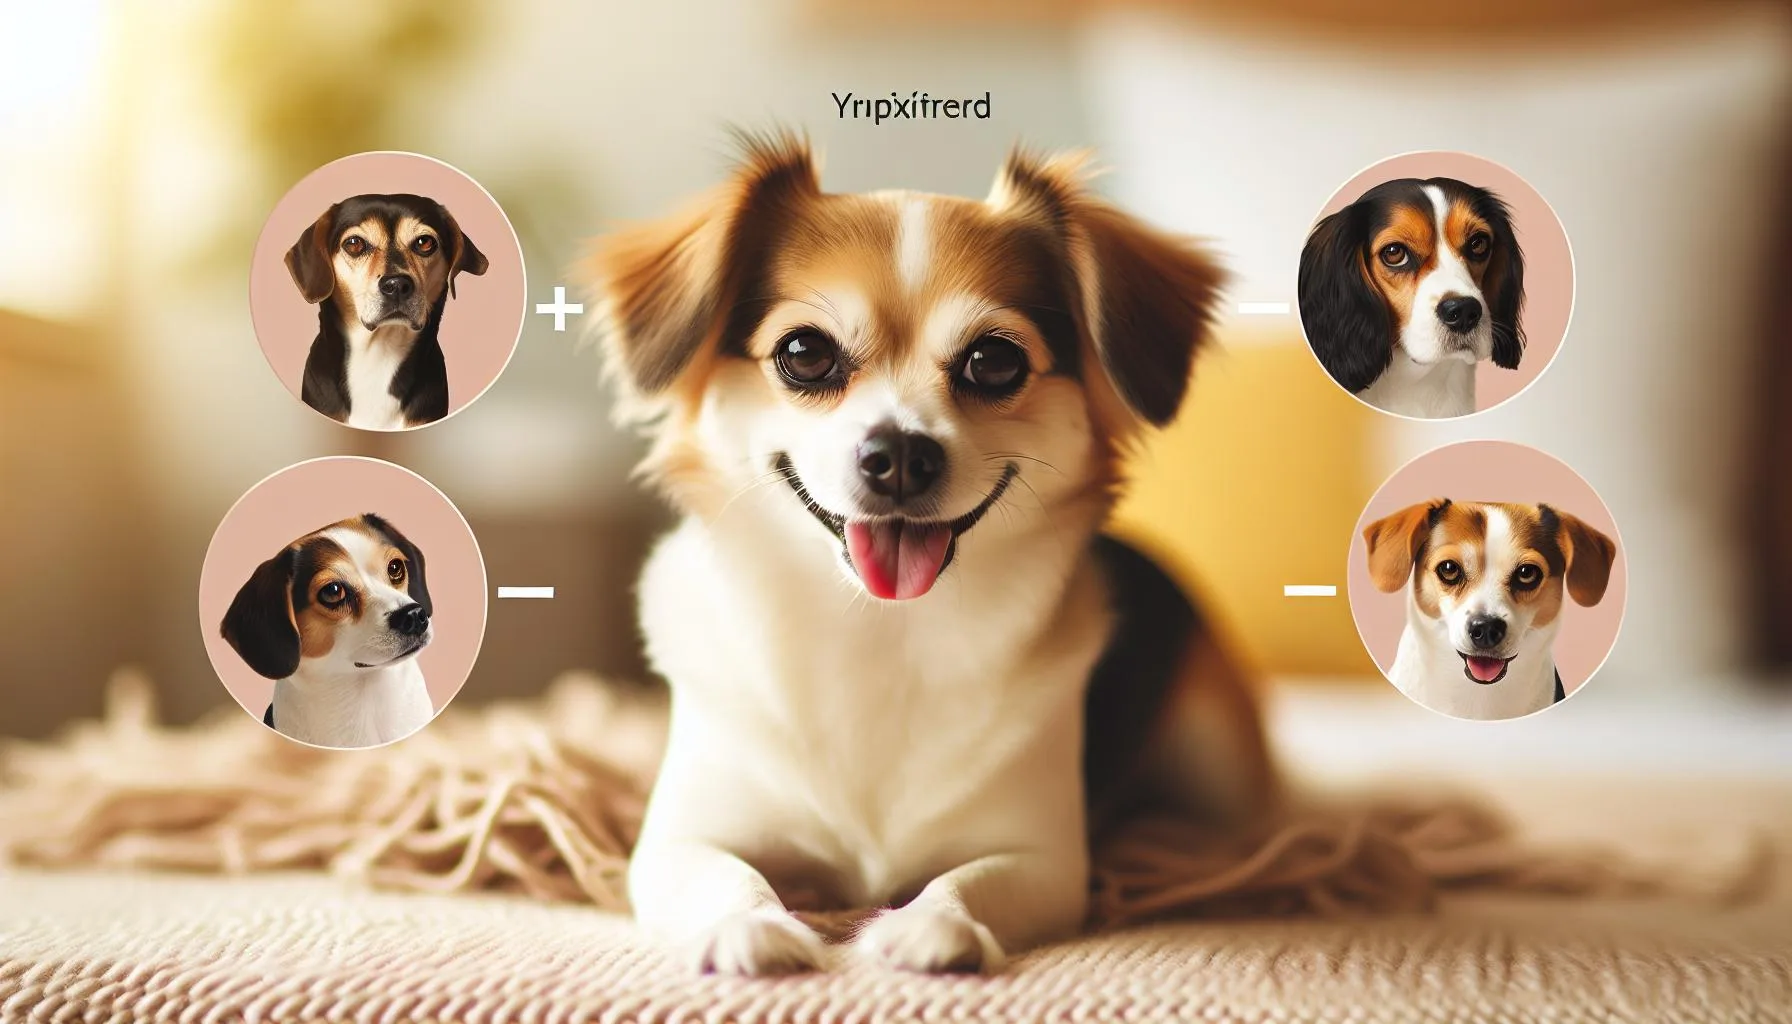 Chihuahua beagle mix: Find your perfect companion now!